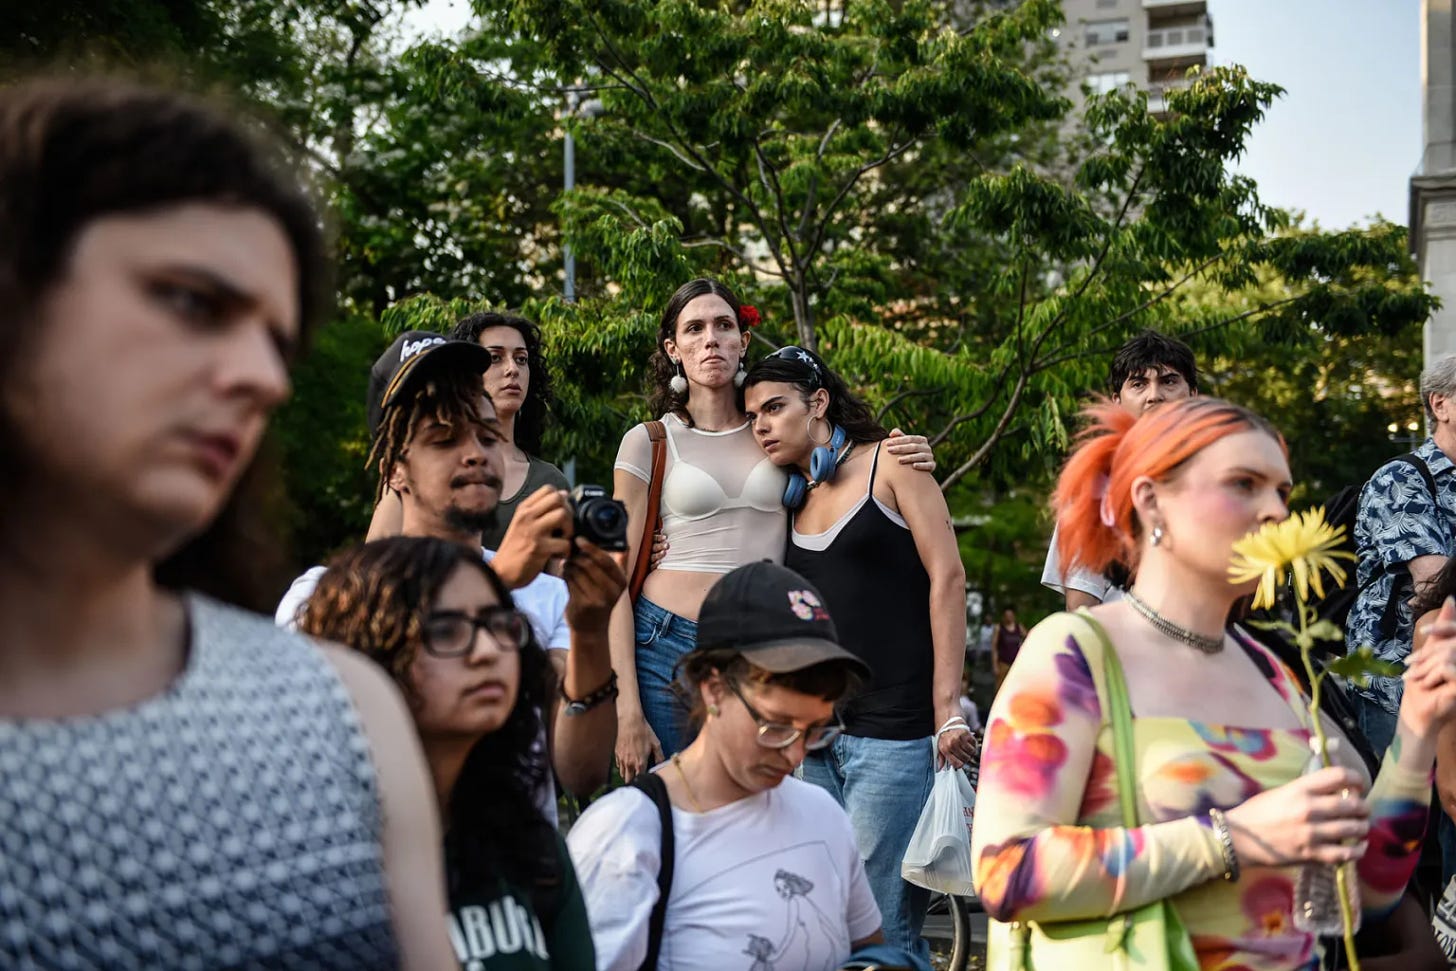 A varied group of people gathered at an event in support of trans people. The group is primarily looking off camera, and some are holding one another. Another holds a yellow flower.